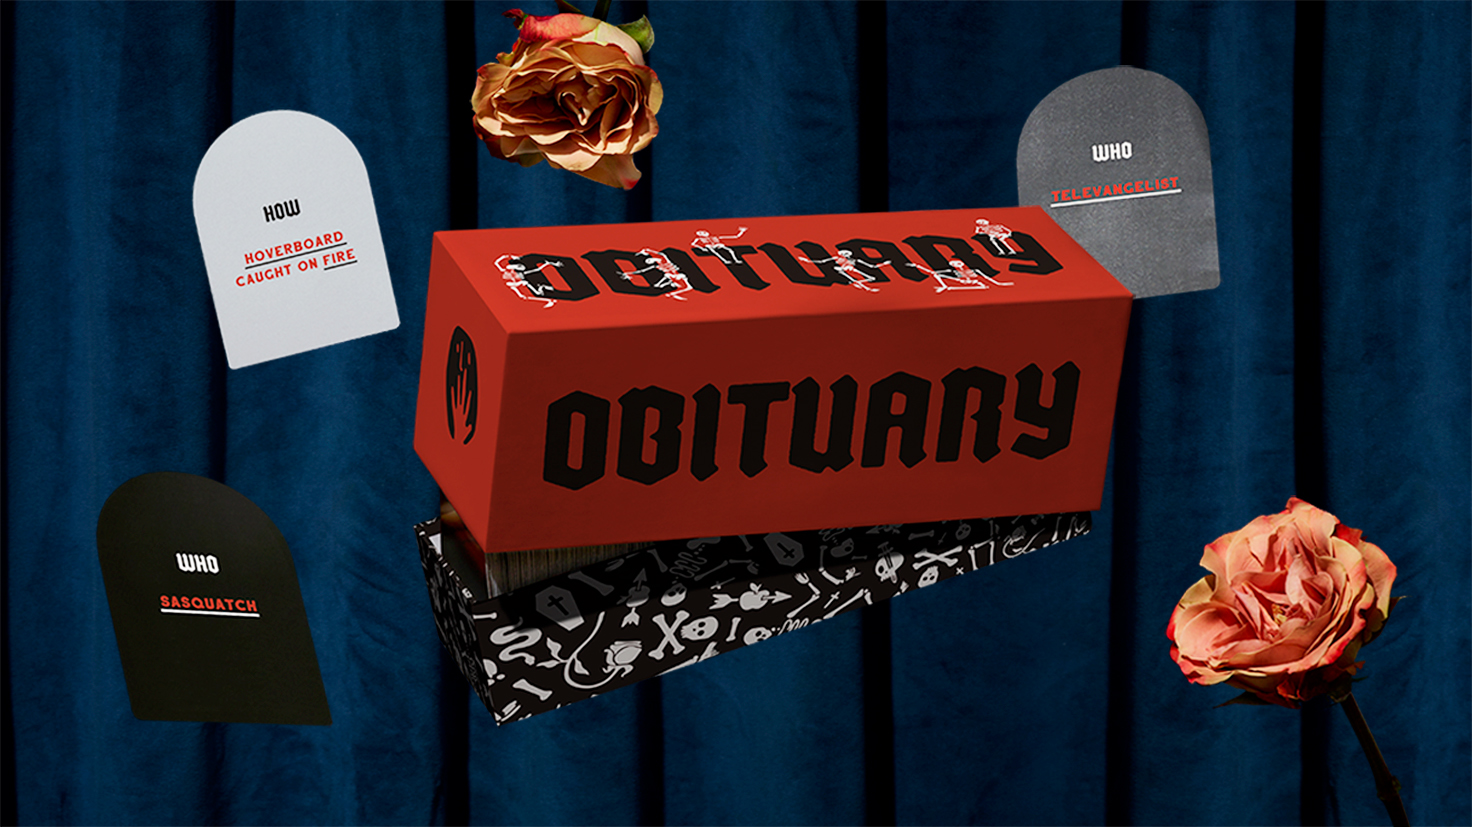 Helms Workshop’s Packaging Design for Obituary, the Game Is Where Quirkiness Meets Creativity